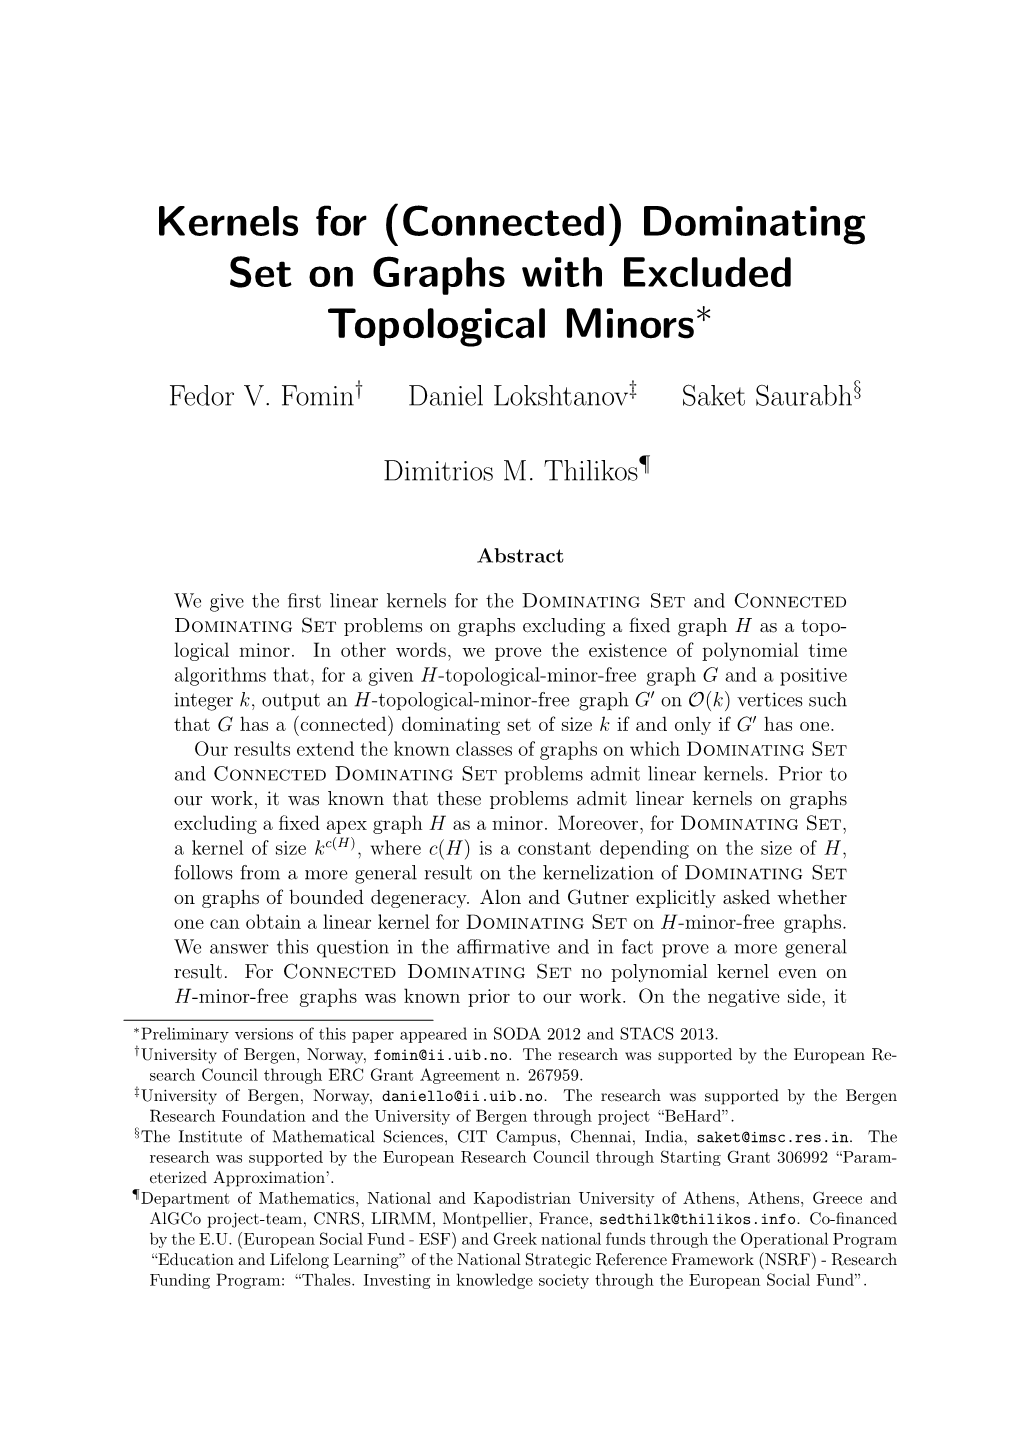 Kernels for (Connected) Dominating Set on Graphs with Excluded Topological Minors∗